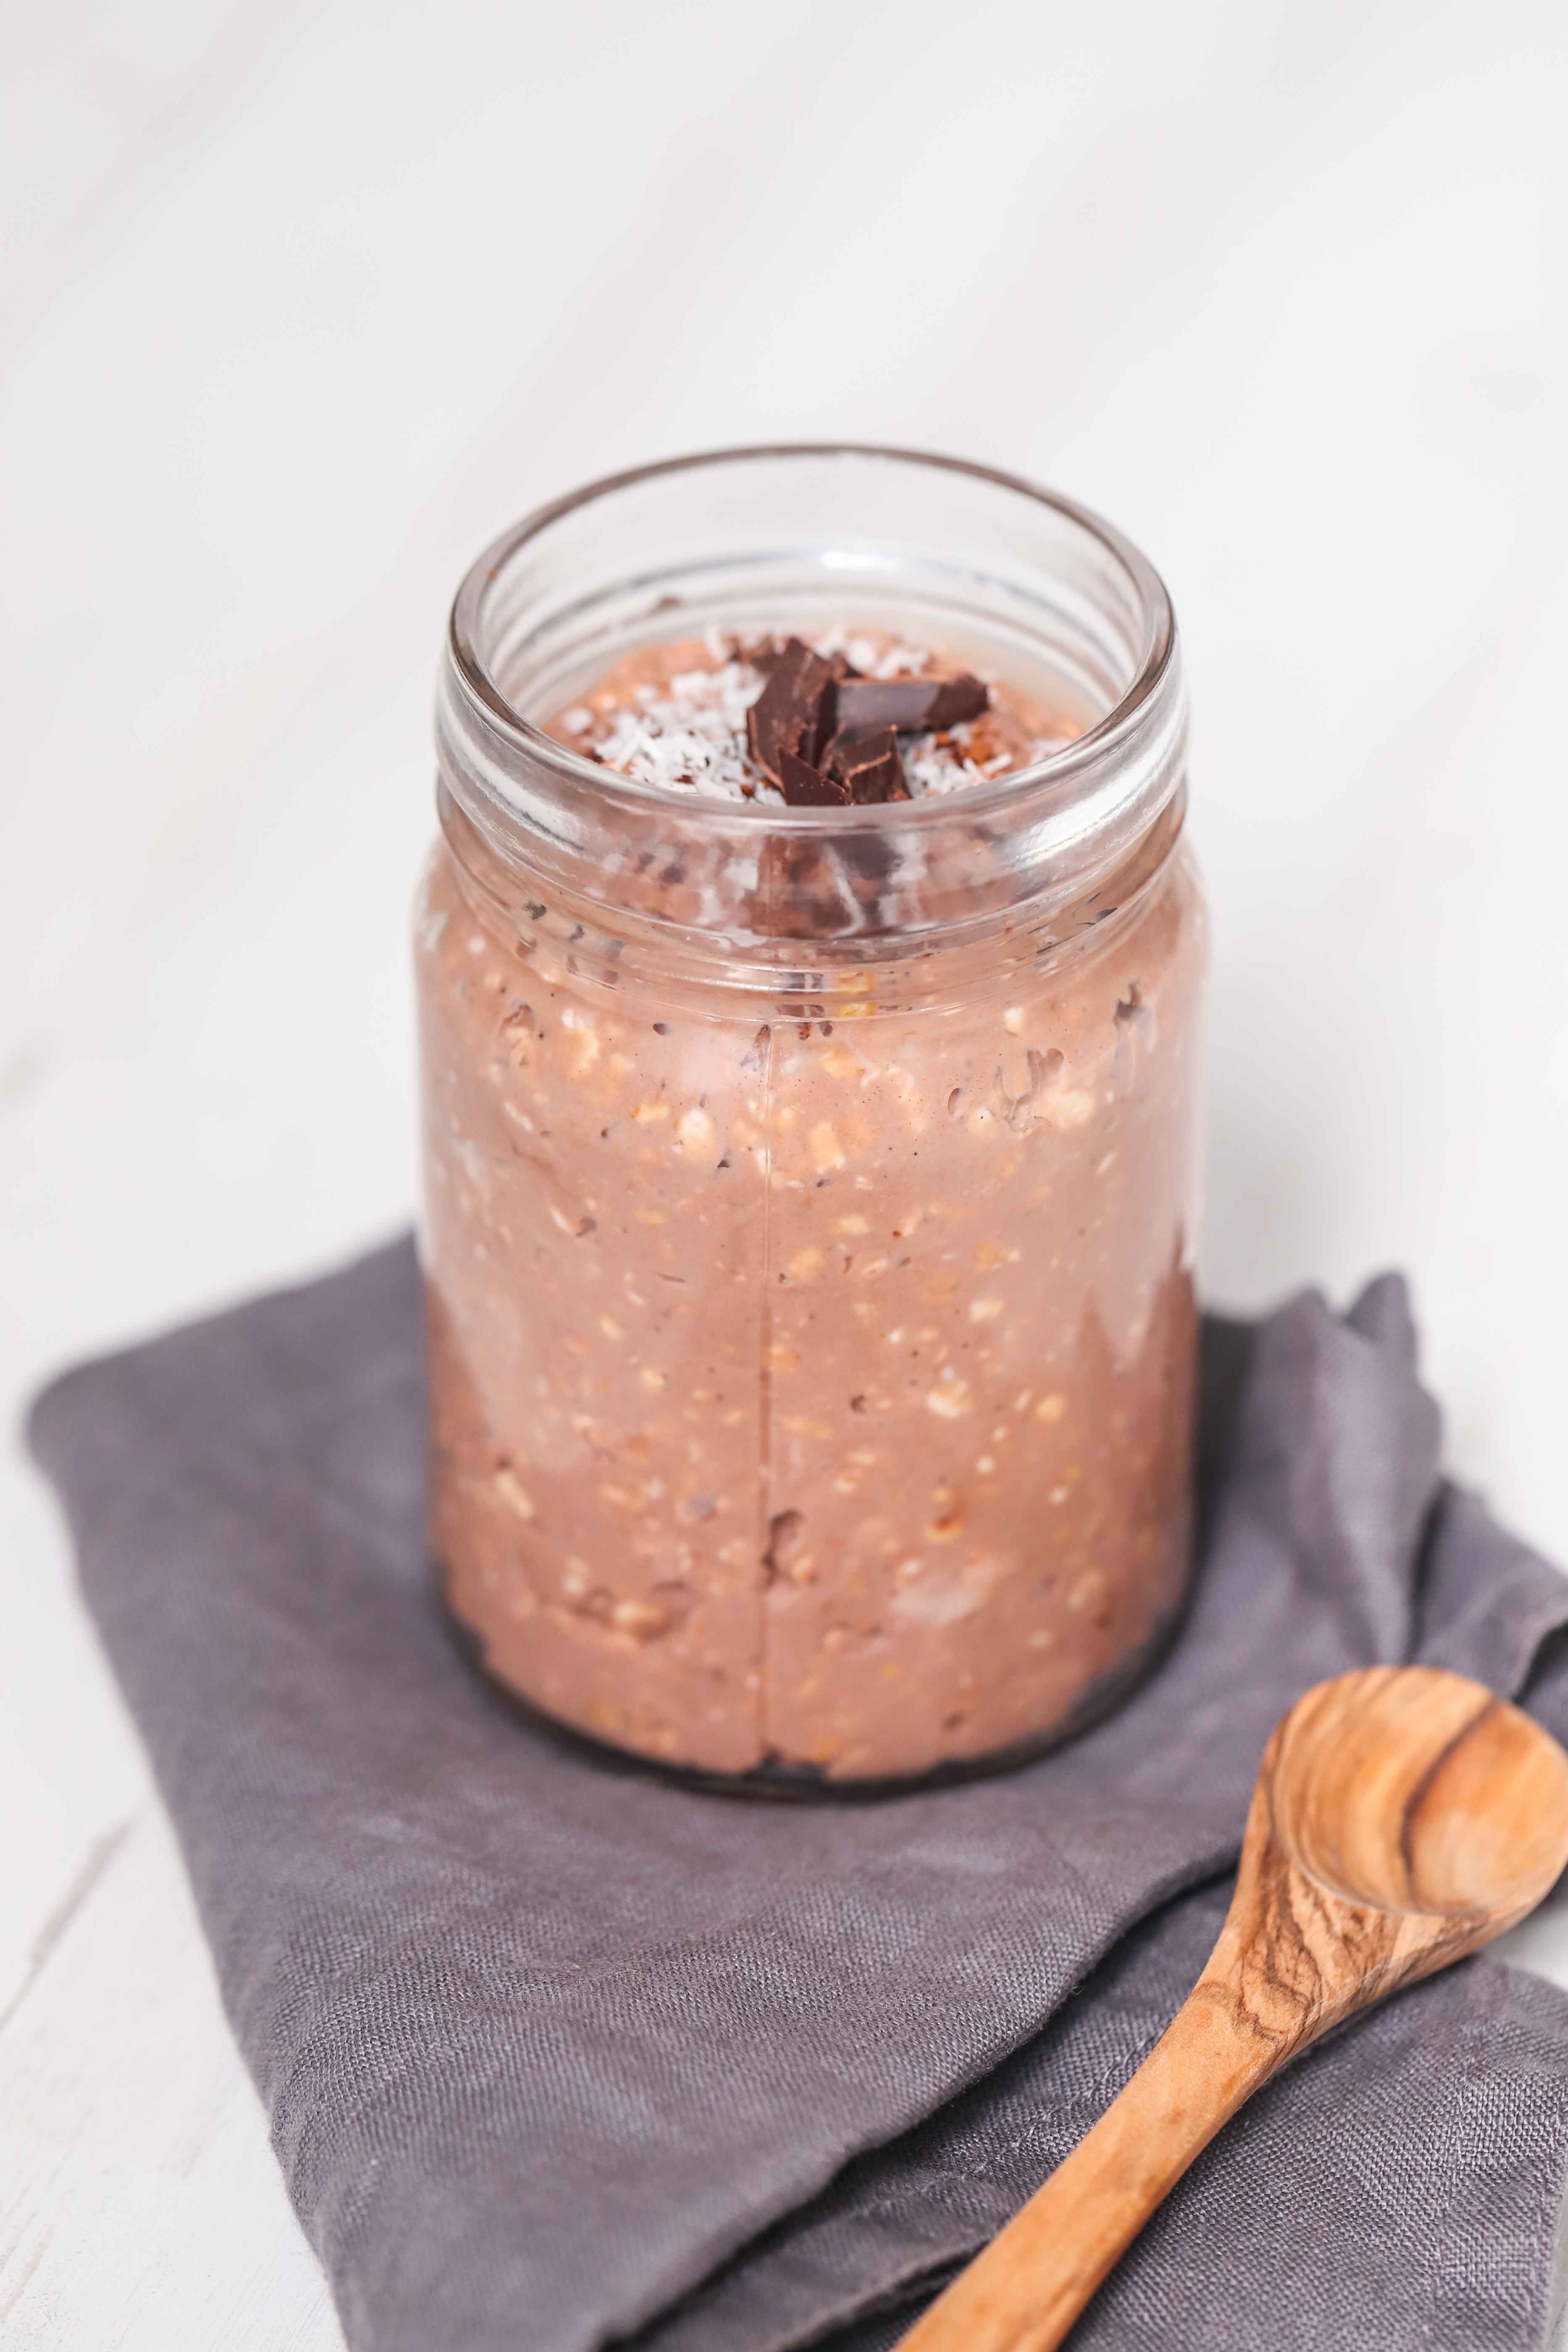 For all of you chocolate fans out there...chocolate overnight oats